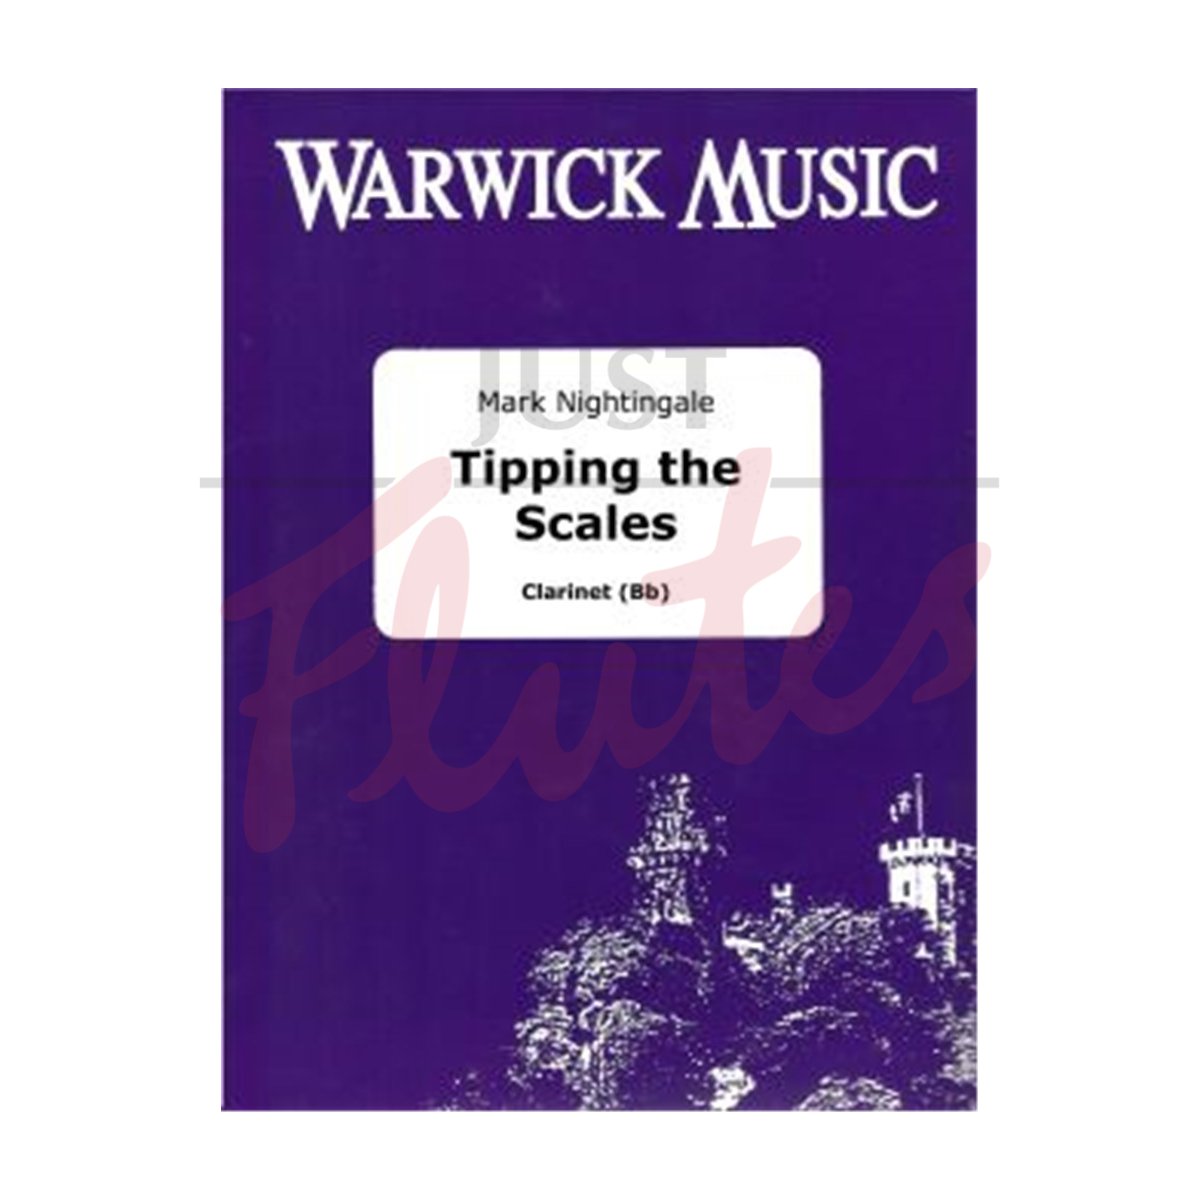 Tipping the Scales for Clarinet